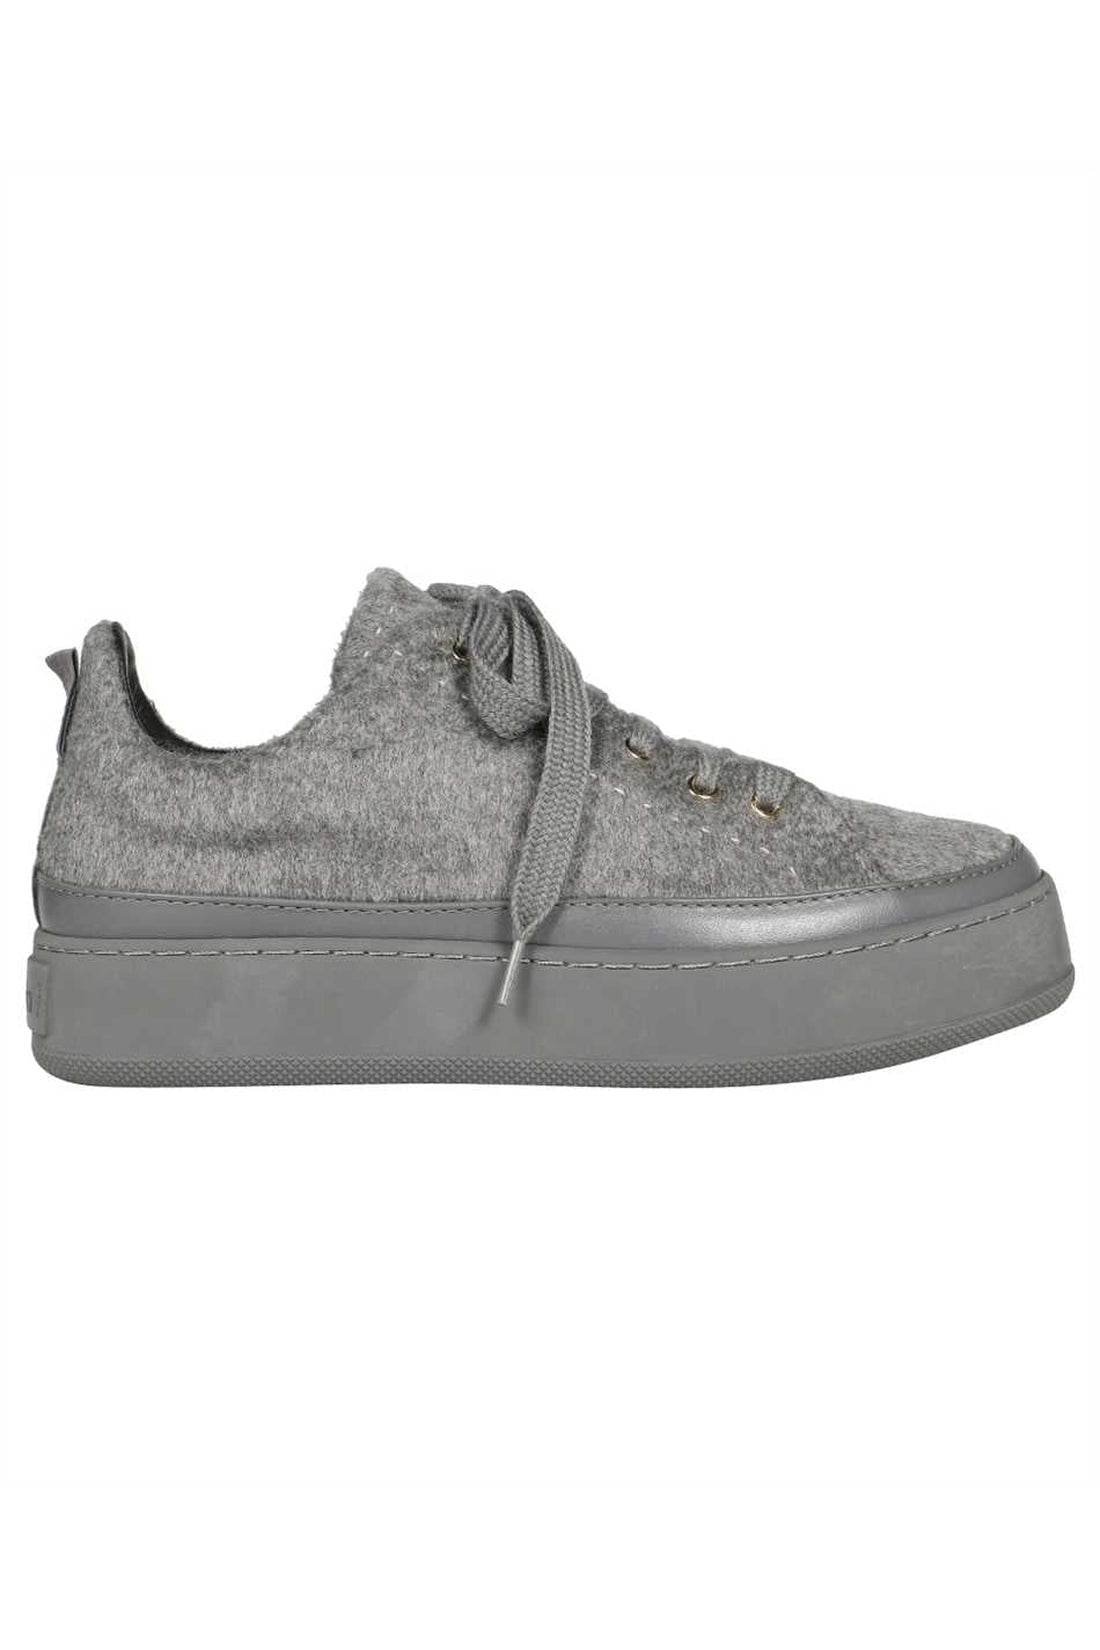 Max Mara-OUTLET-SALE-Tunny low-top sneakers-ARCHIVIST